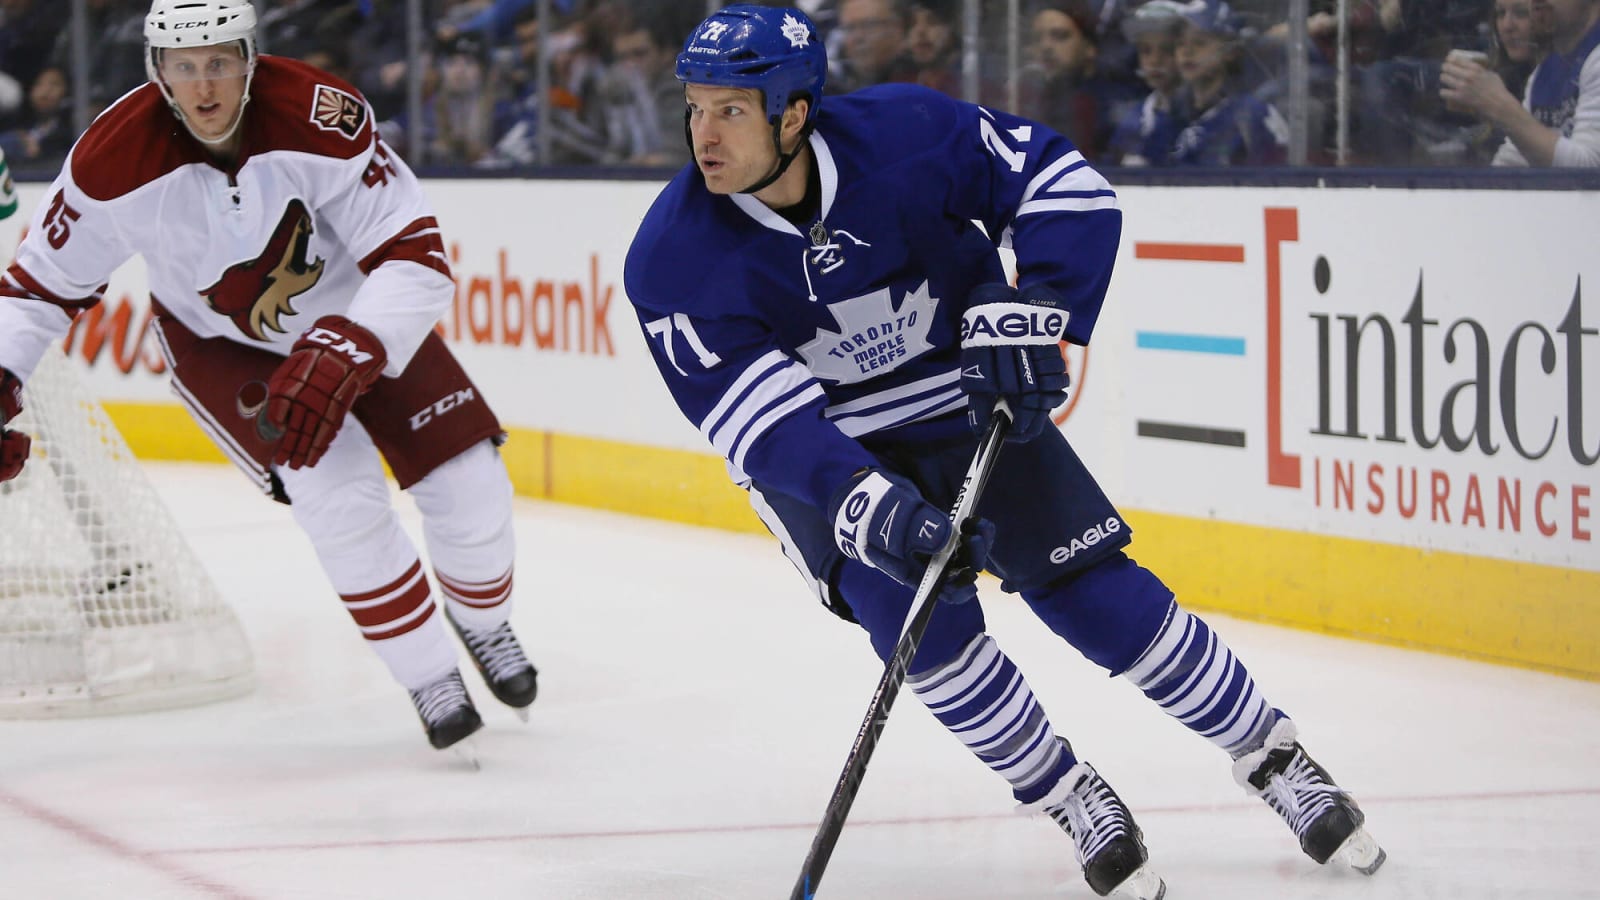 On this day in 2013, the Toronto Maple Leafs signed David Clarkson